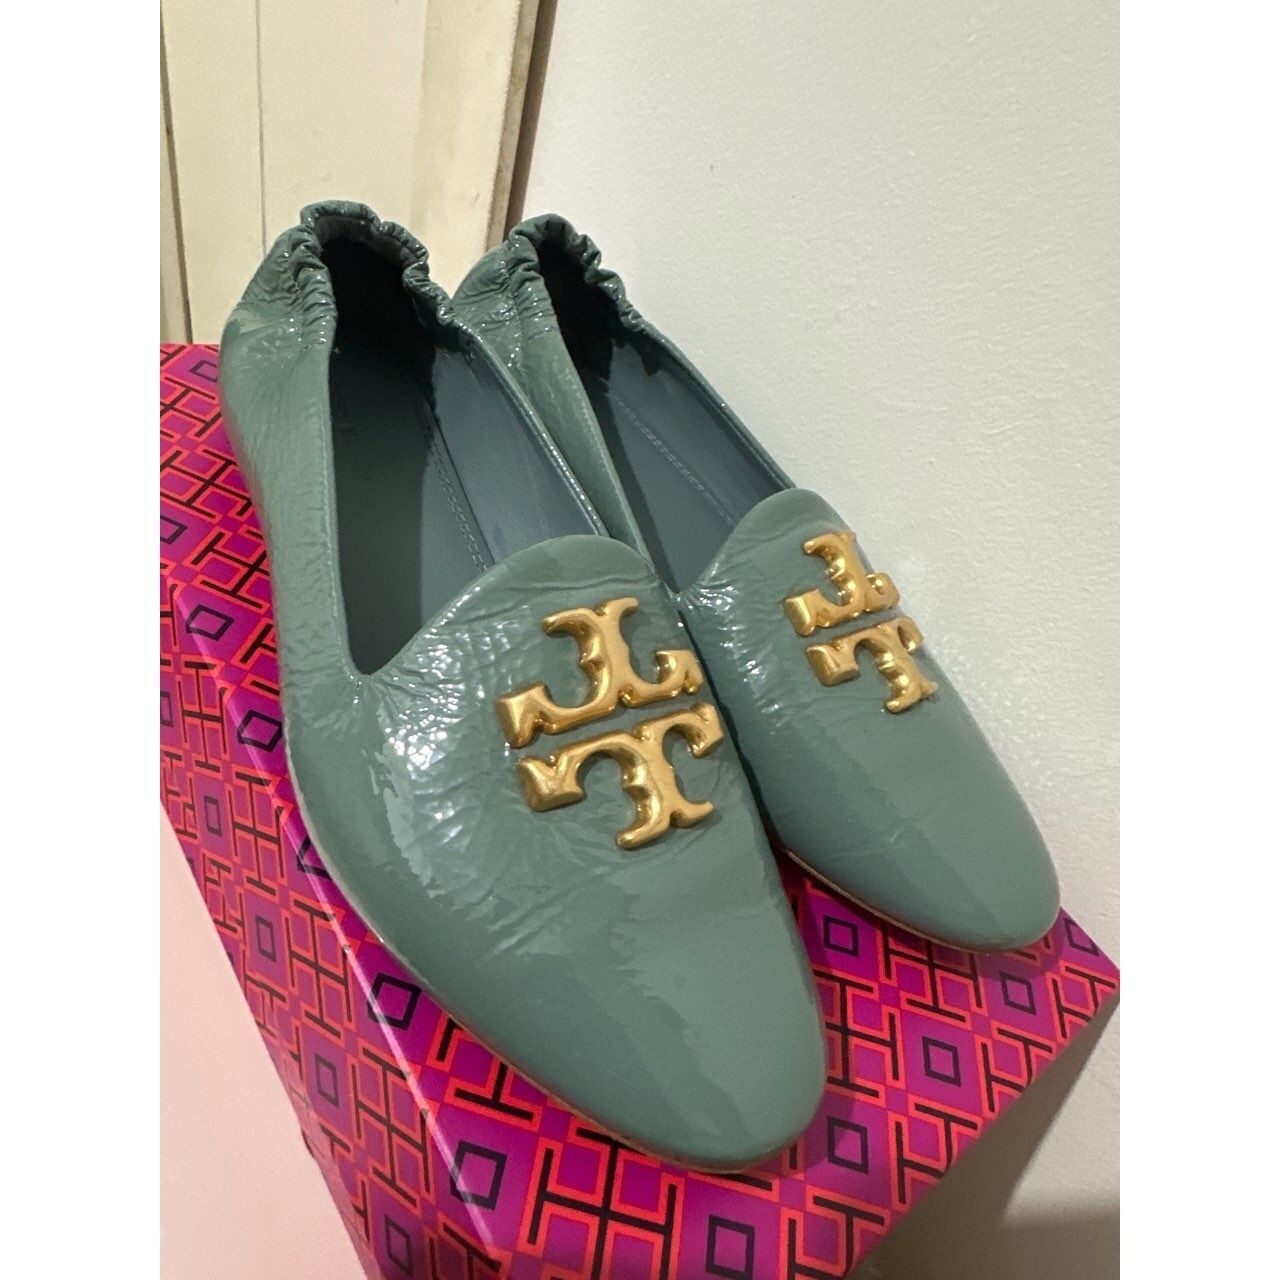 Tory Burch Eleanor Teal Loafers